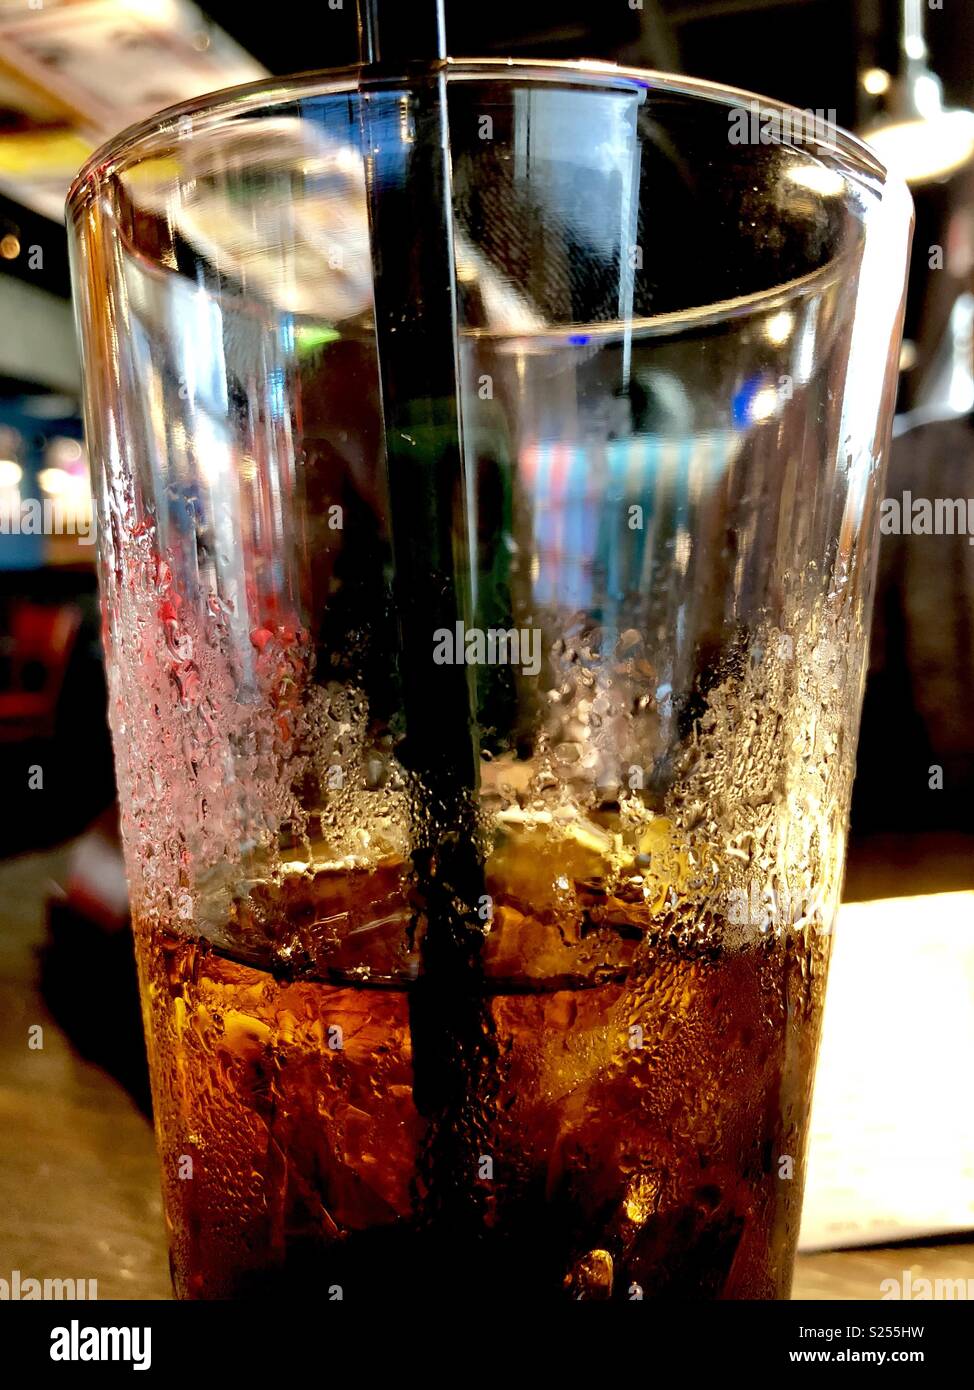 Half full glass of iced cola Stock Photo